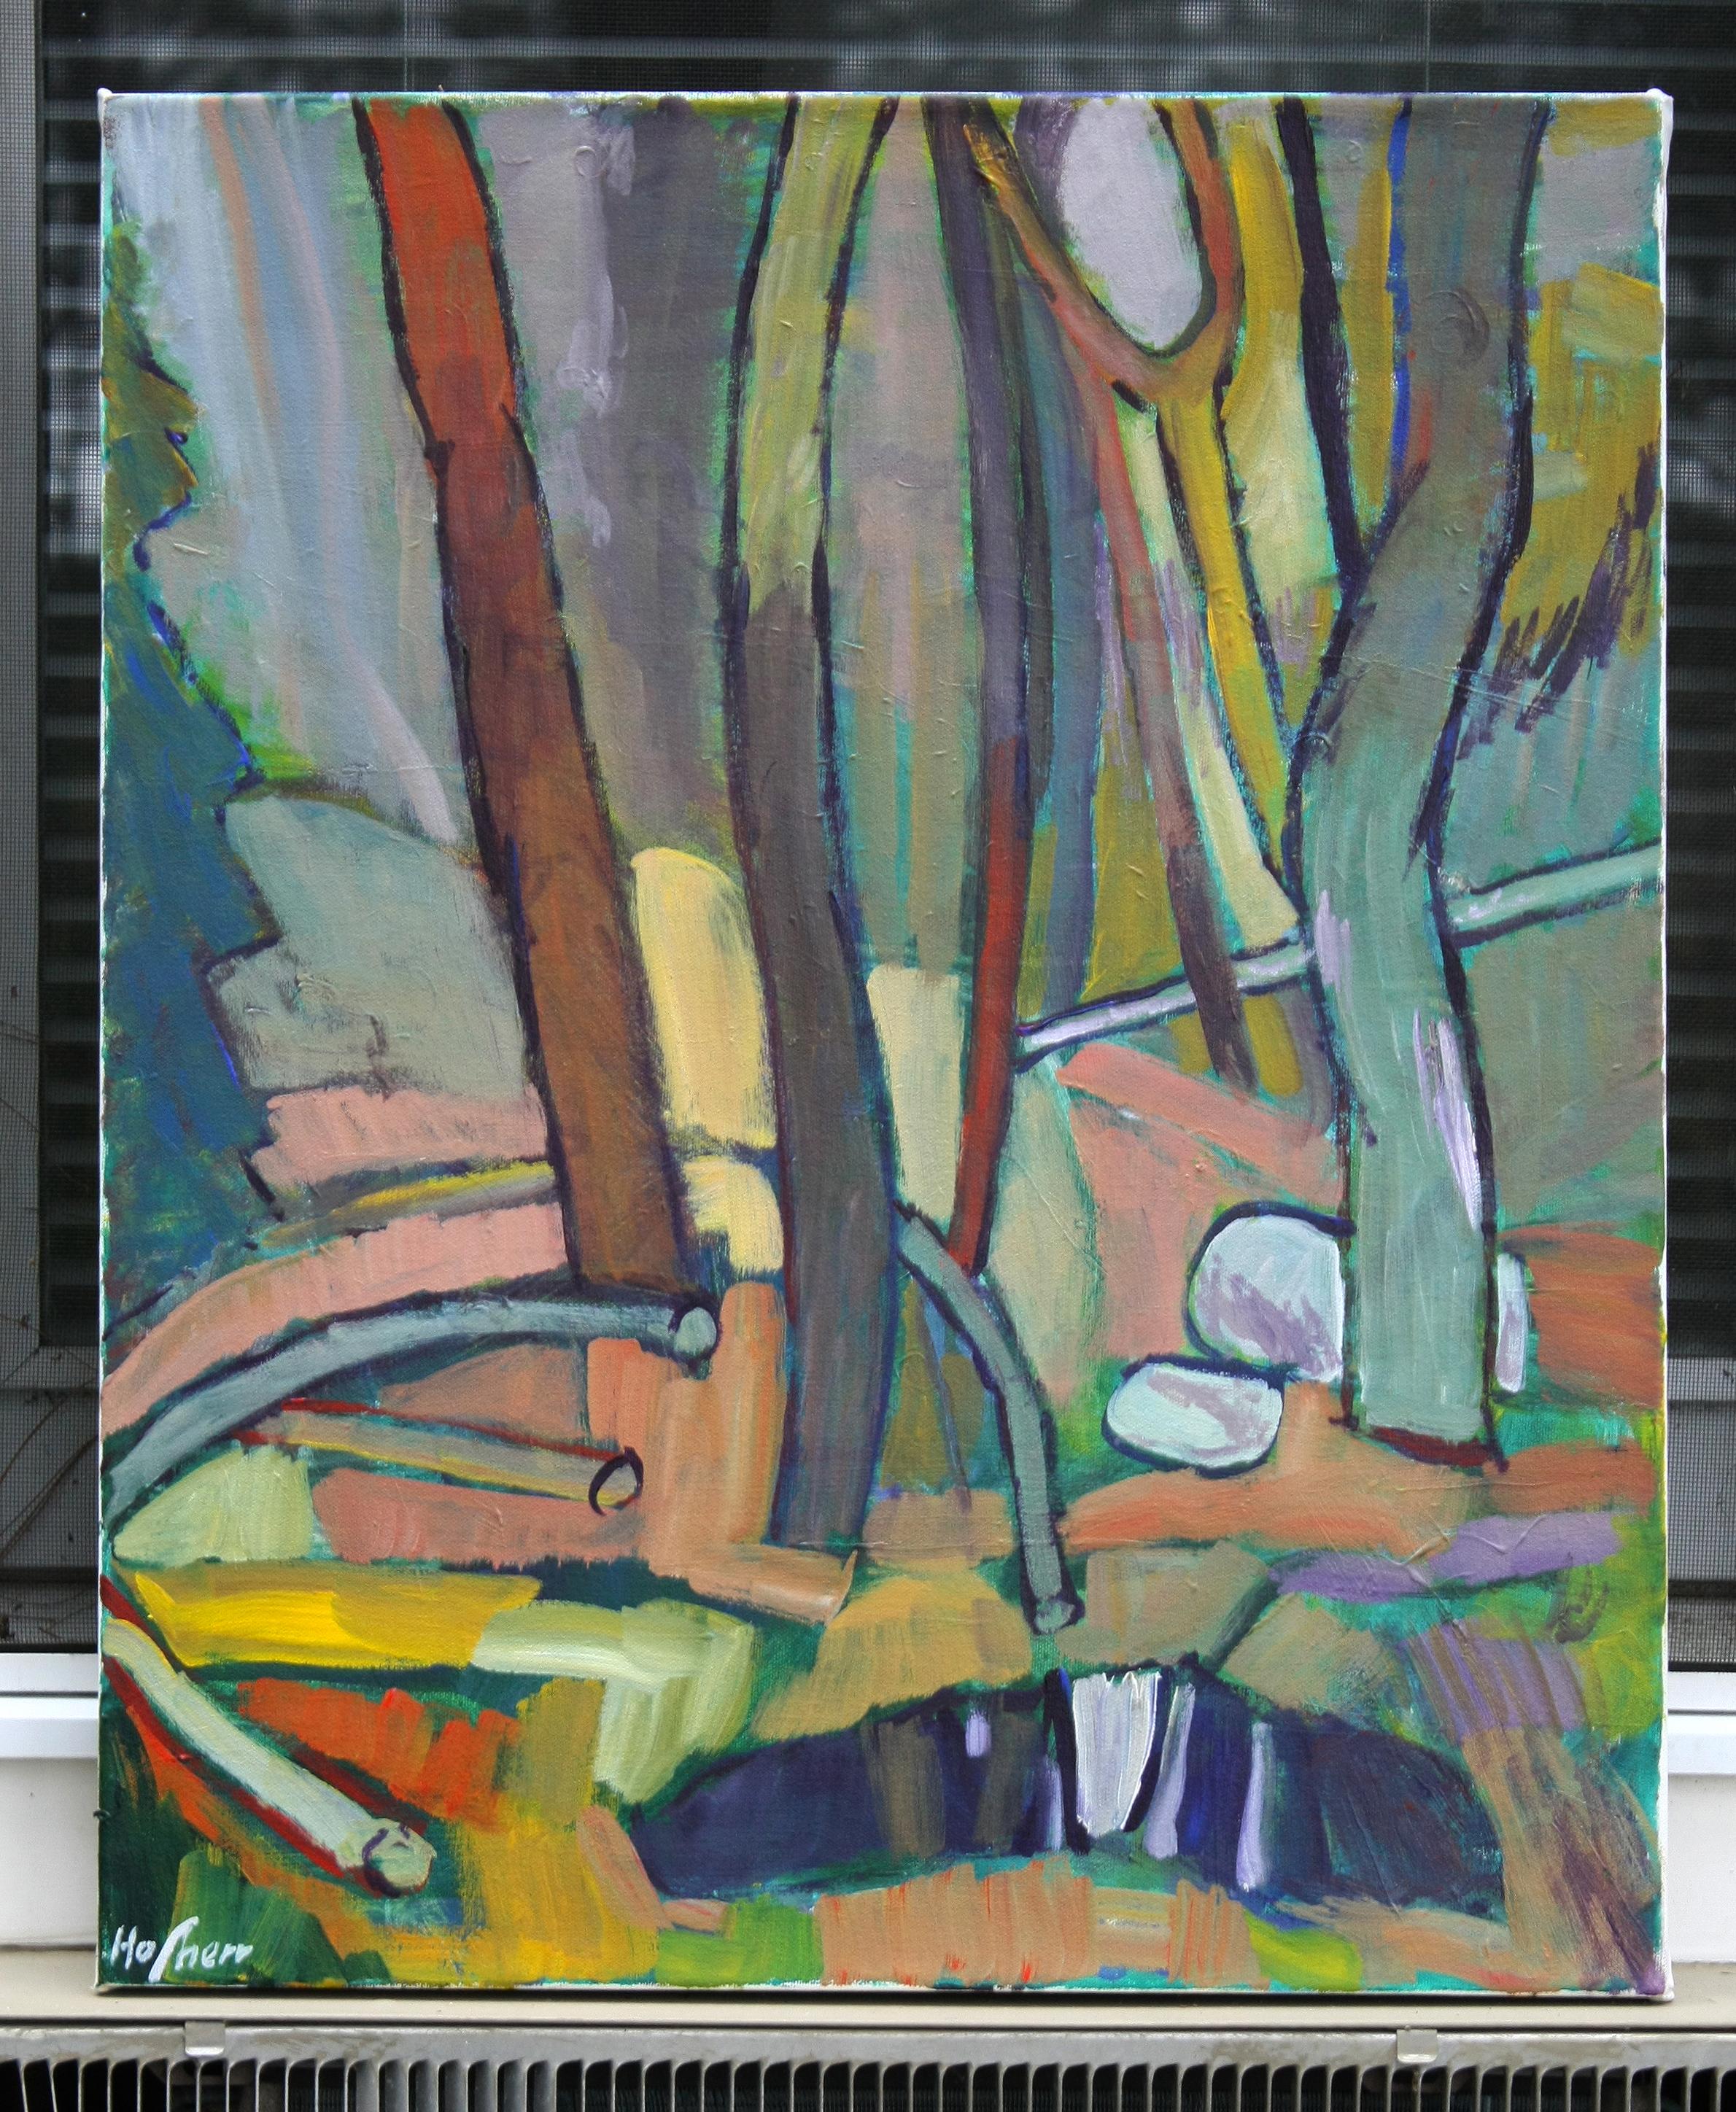 <p>Artist Comments<br>The artwork presents an expressionist view of a Massachusetts woodland, featuring simplified details and muted colors. It exemplifies reduction, offering only the essential elements needed to complete the forest scene. The